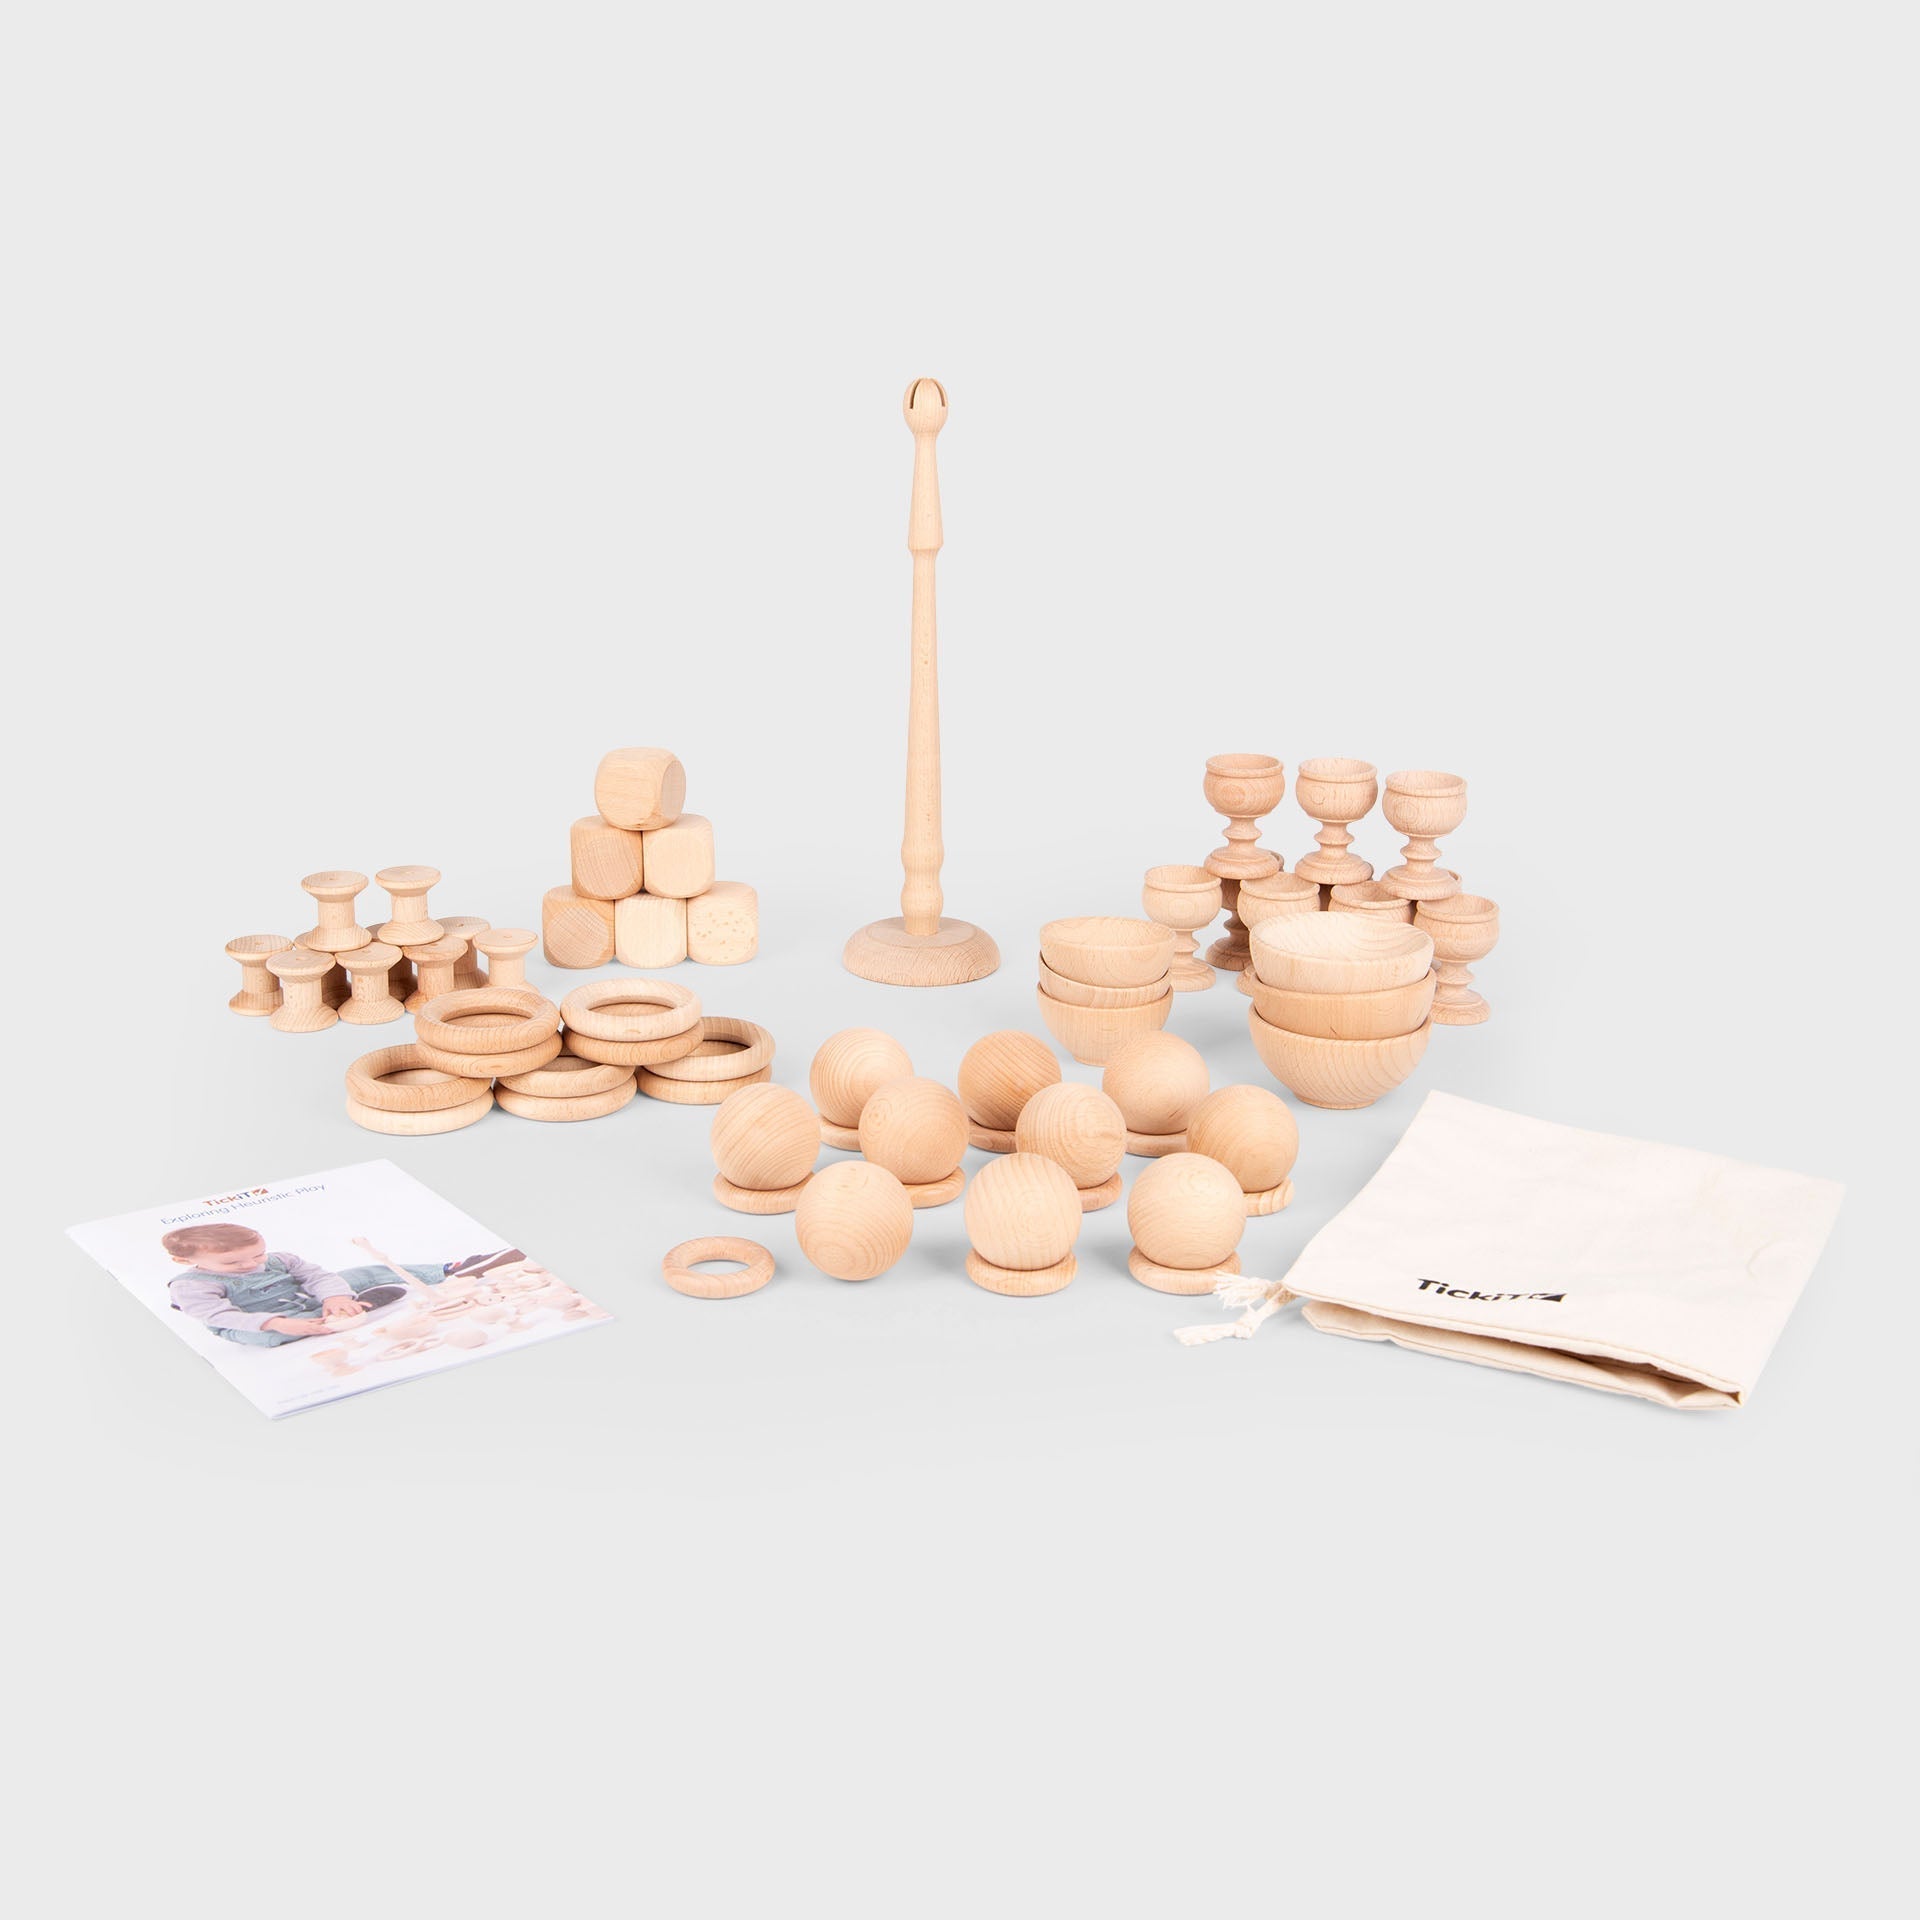 Heuristic Play Starter Set, The Heuristic Play Starter Set is a wonderful opportunity to nourish toddlers’ curiosity about the objects that make up the world around them. The resources which make up this Heuristic Play Starter Set are not objects traditionally thought of as toys for young children, but they provide equally valuable opportunities for stimulating and extending children’s learning. The open-ended nature of the Heuristic Play Starter Set enables all toddlers to explore and investigate in their 